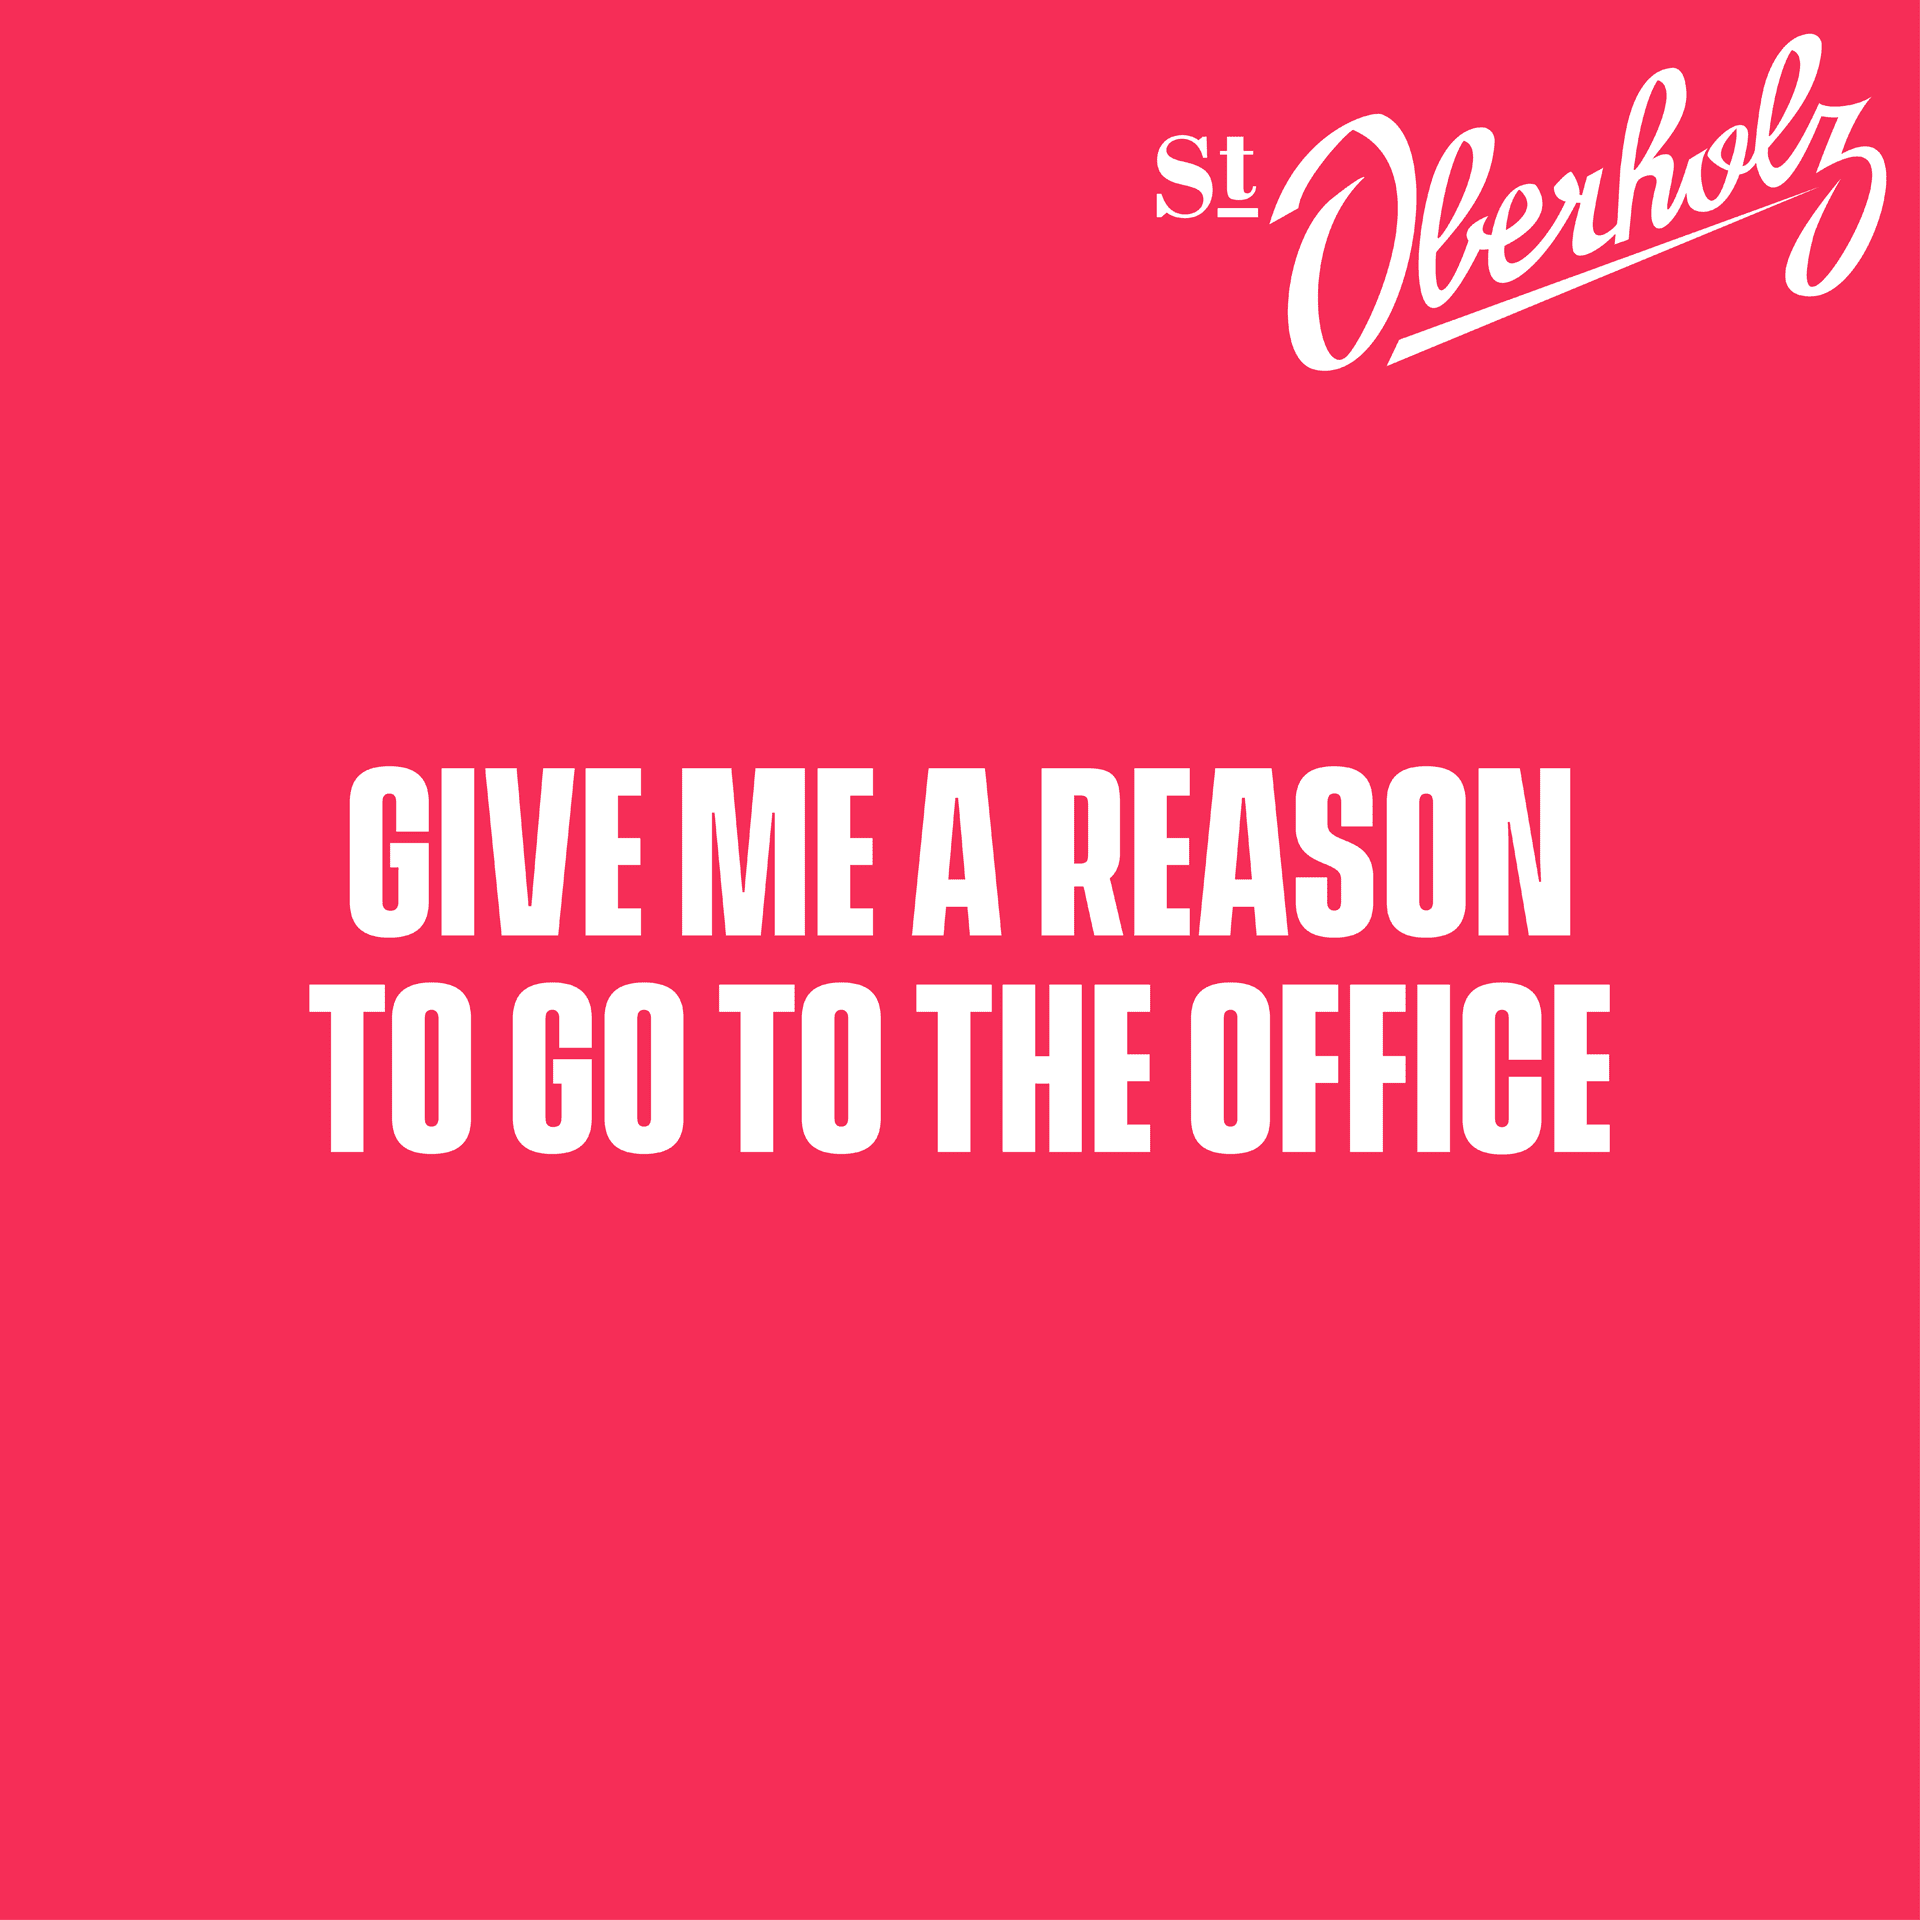 Give me a reason to go to the office